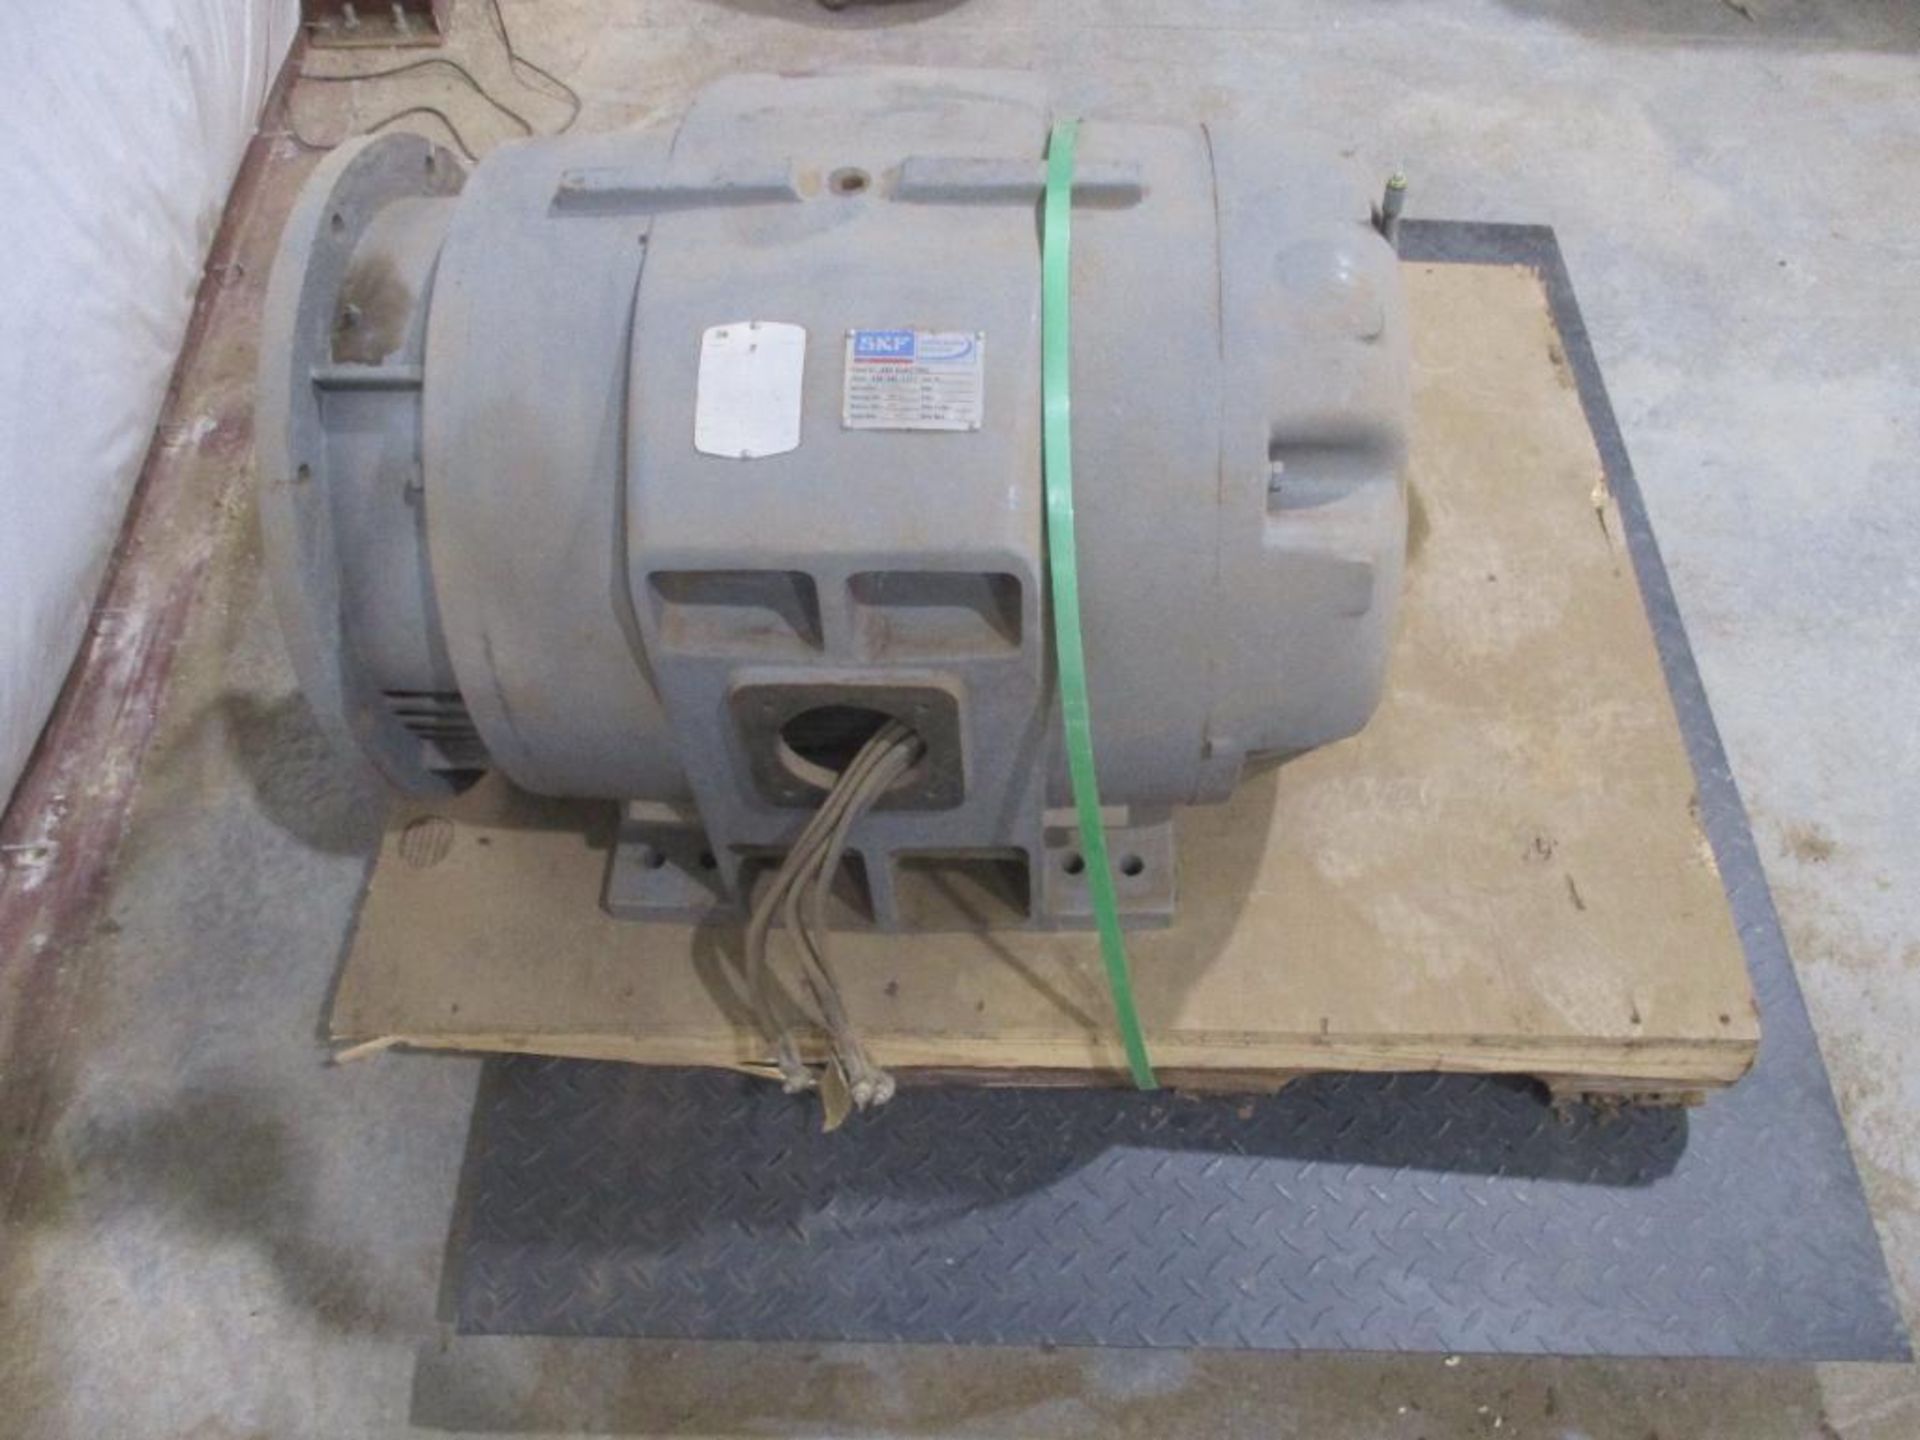 BALDOR 3 PHASE 150HP 1780RPM 444TS FRAME A/C MOTOR P/N M2558TS-4, 1357# lbs (There will be a $40 Rig